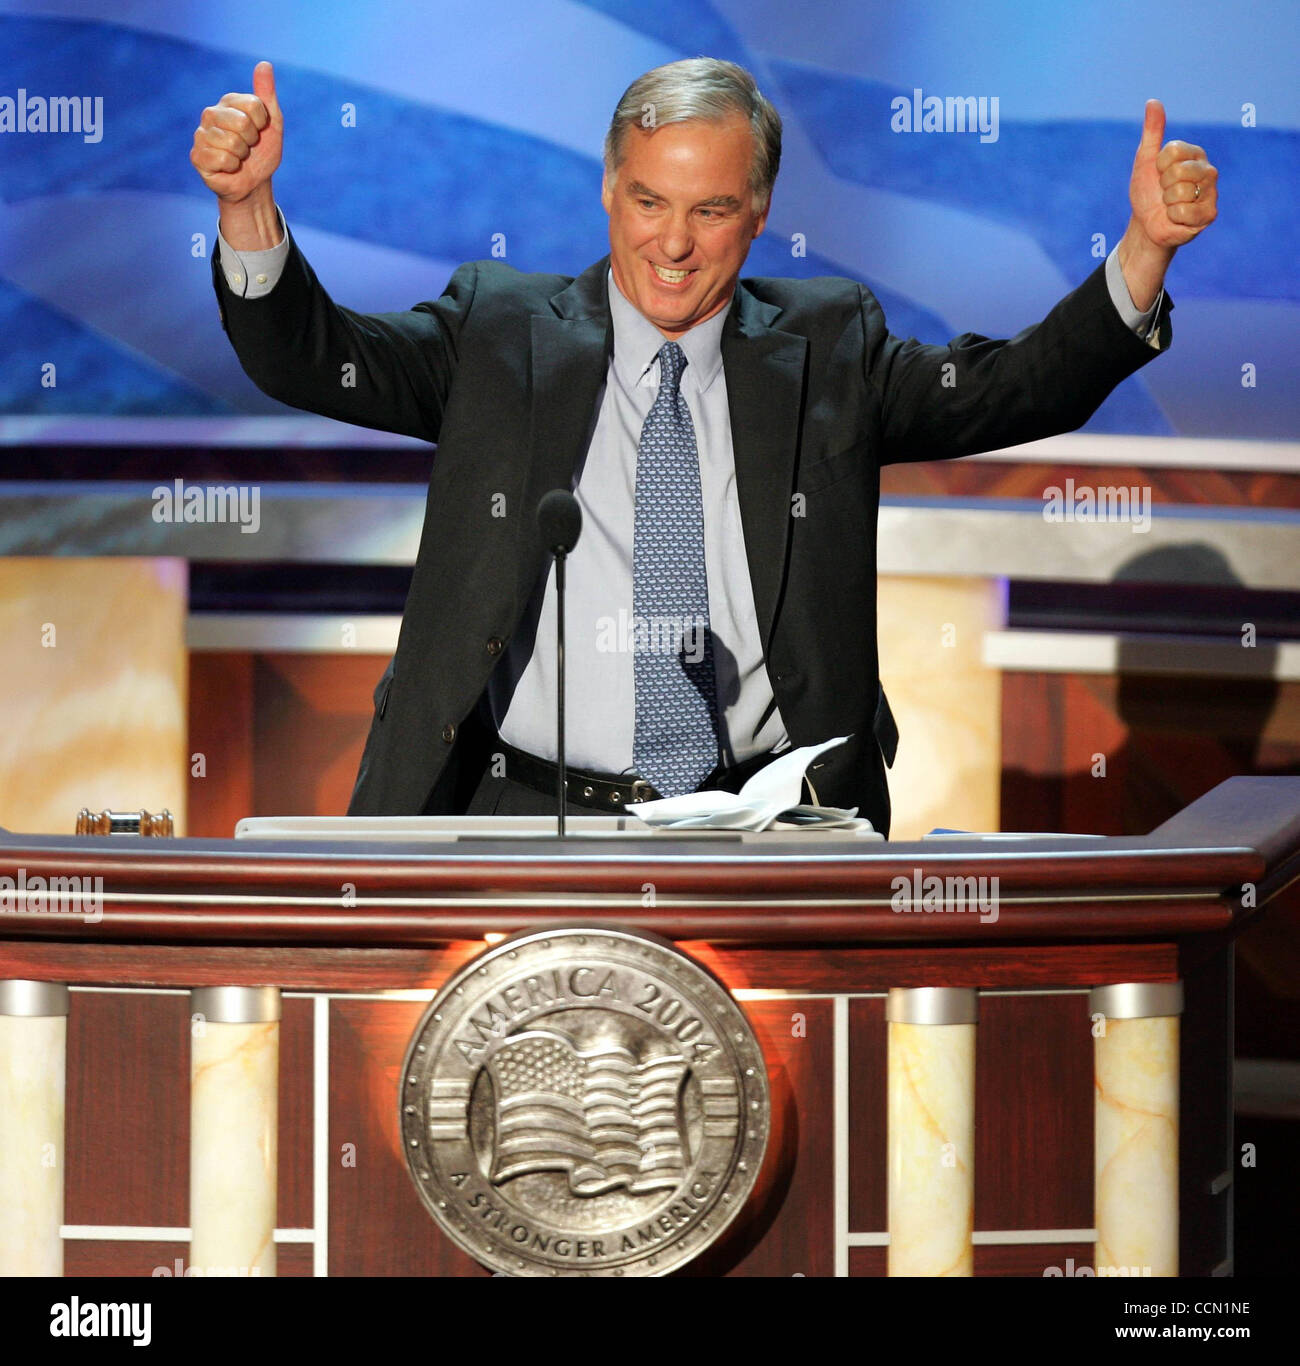 Photo by Richard Graulich/Cox News Service (The Palm Beach Post)  slug: COX-DEM-MAIN27 BOSTON, MA ..Former Vermont Governor and presidential candidate Howard Dean acknowledges the applause  Tuesday night as he begings his speech at the 2004 Democratic National Convention Tuesday night in Boston.  (P Stock Photo